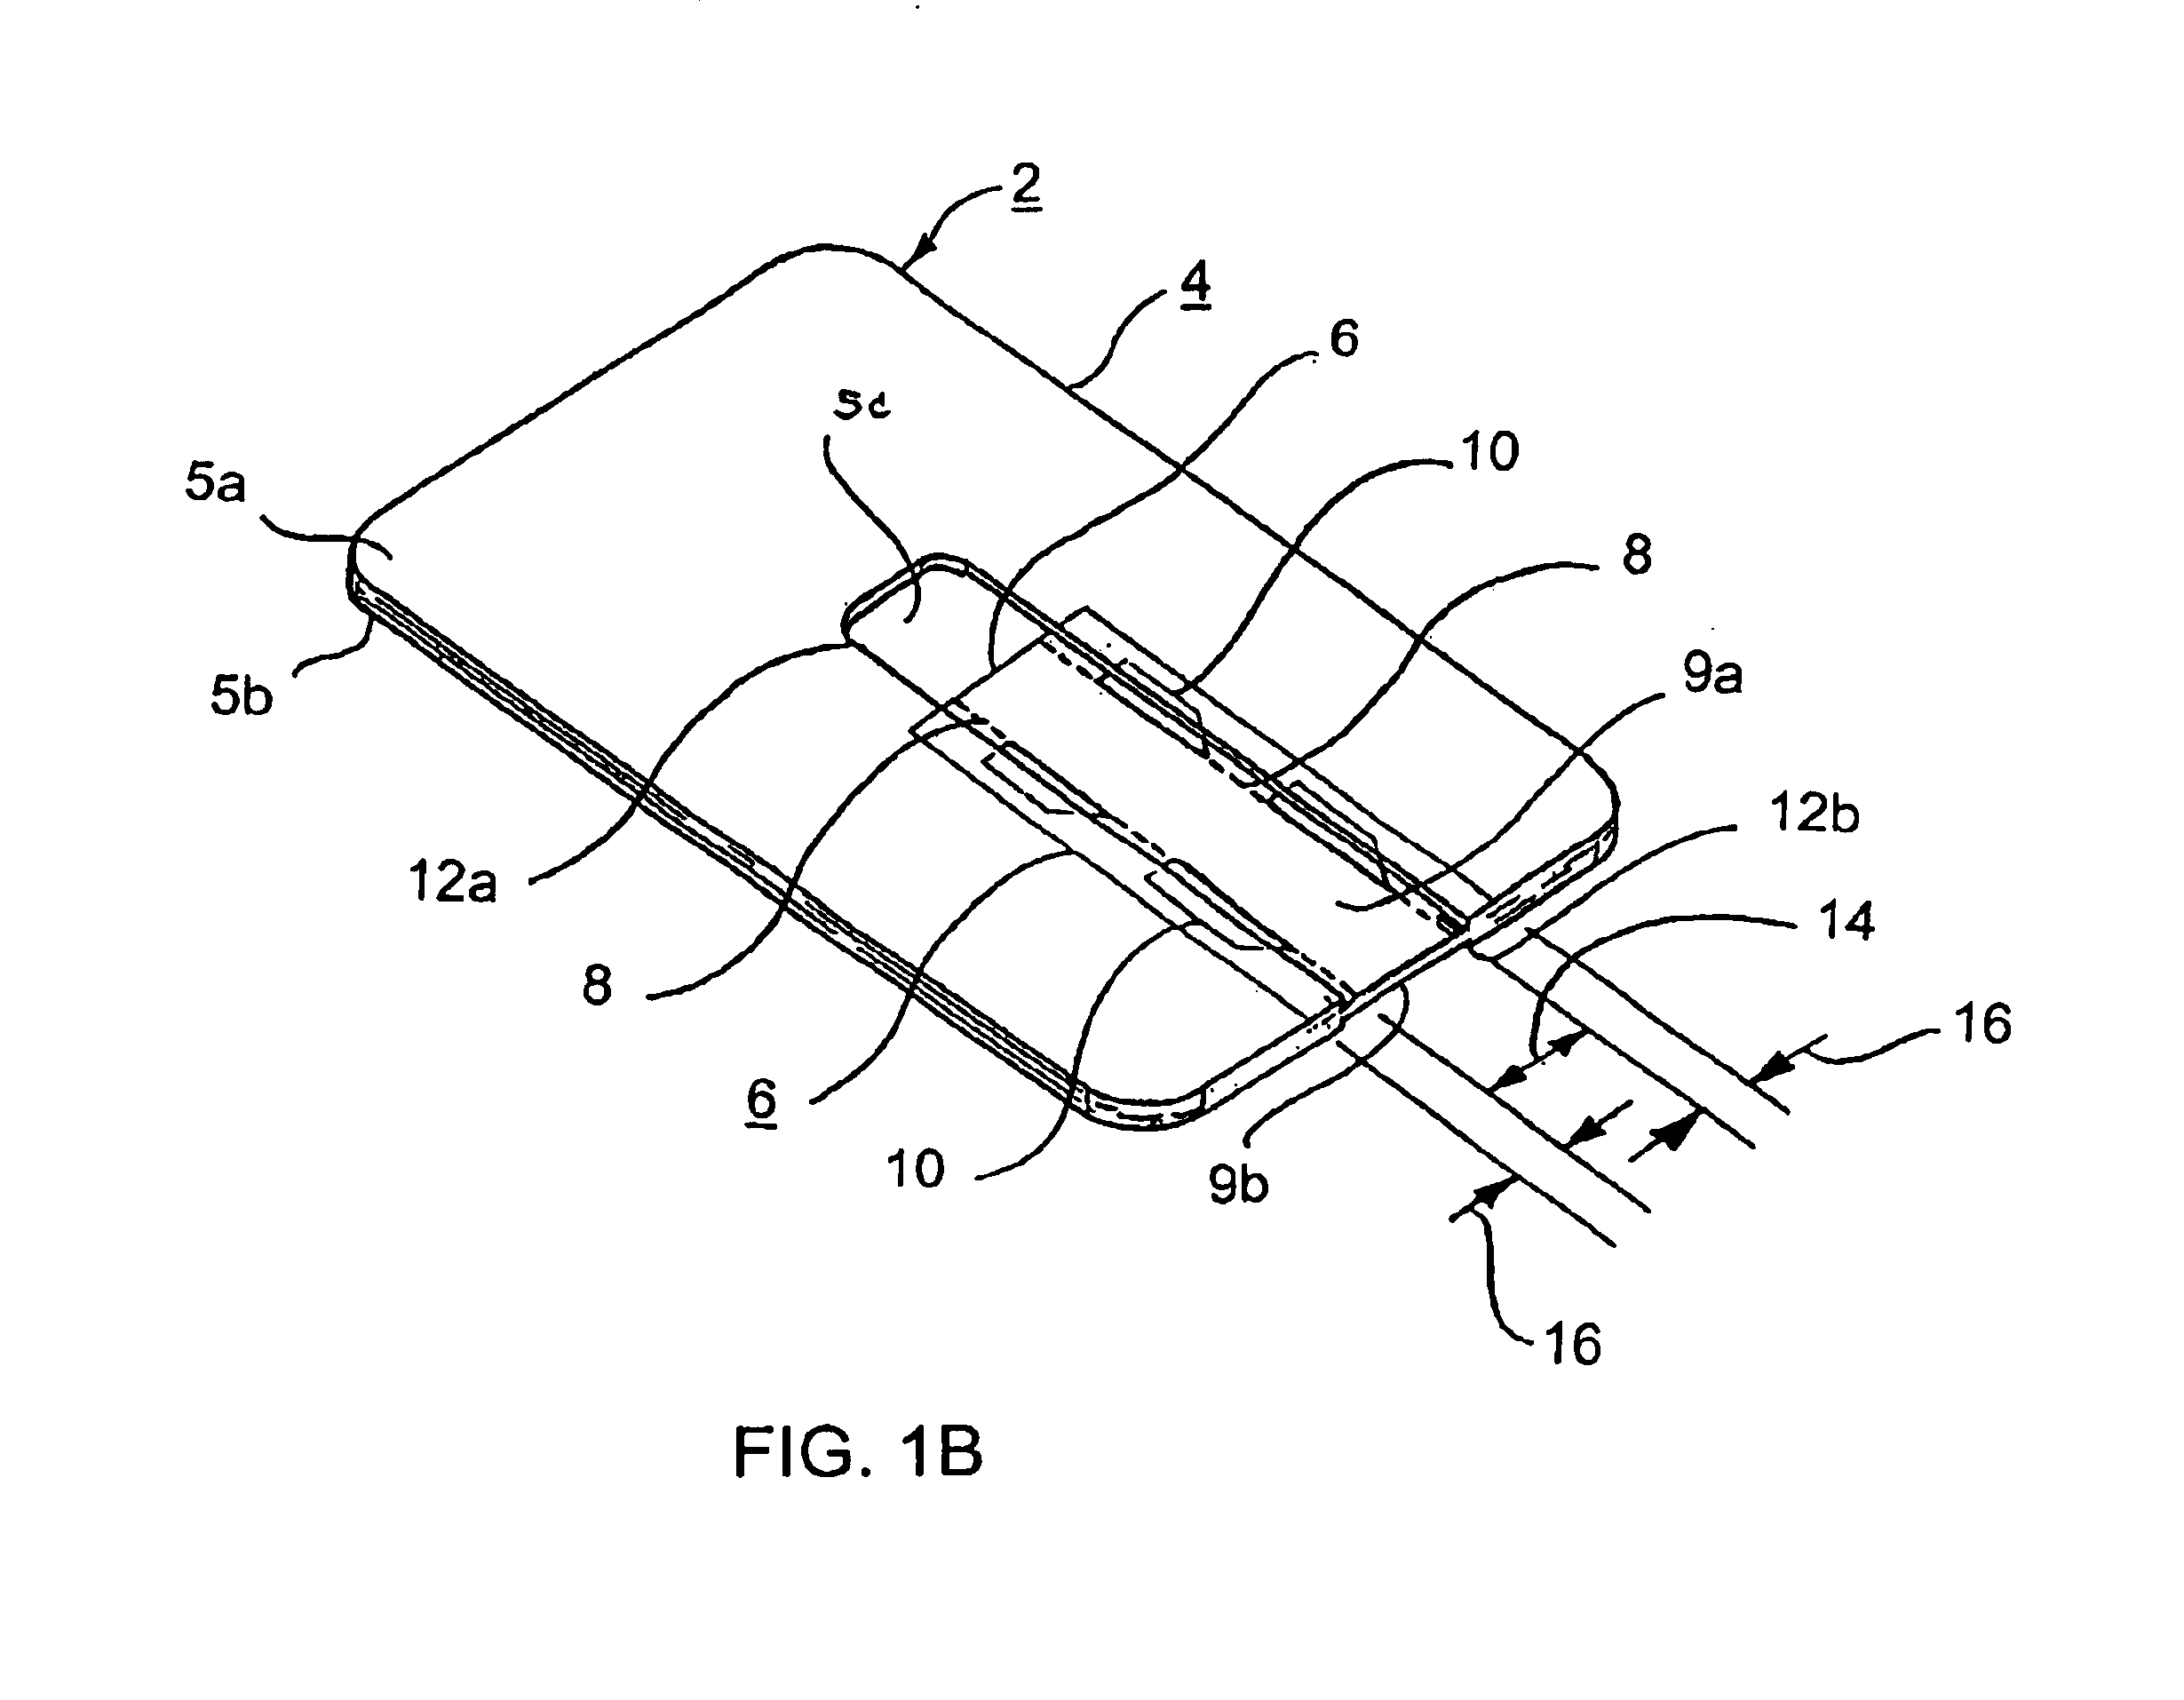 Apparatus and method for applying reinforcement material to a surgical stapler